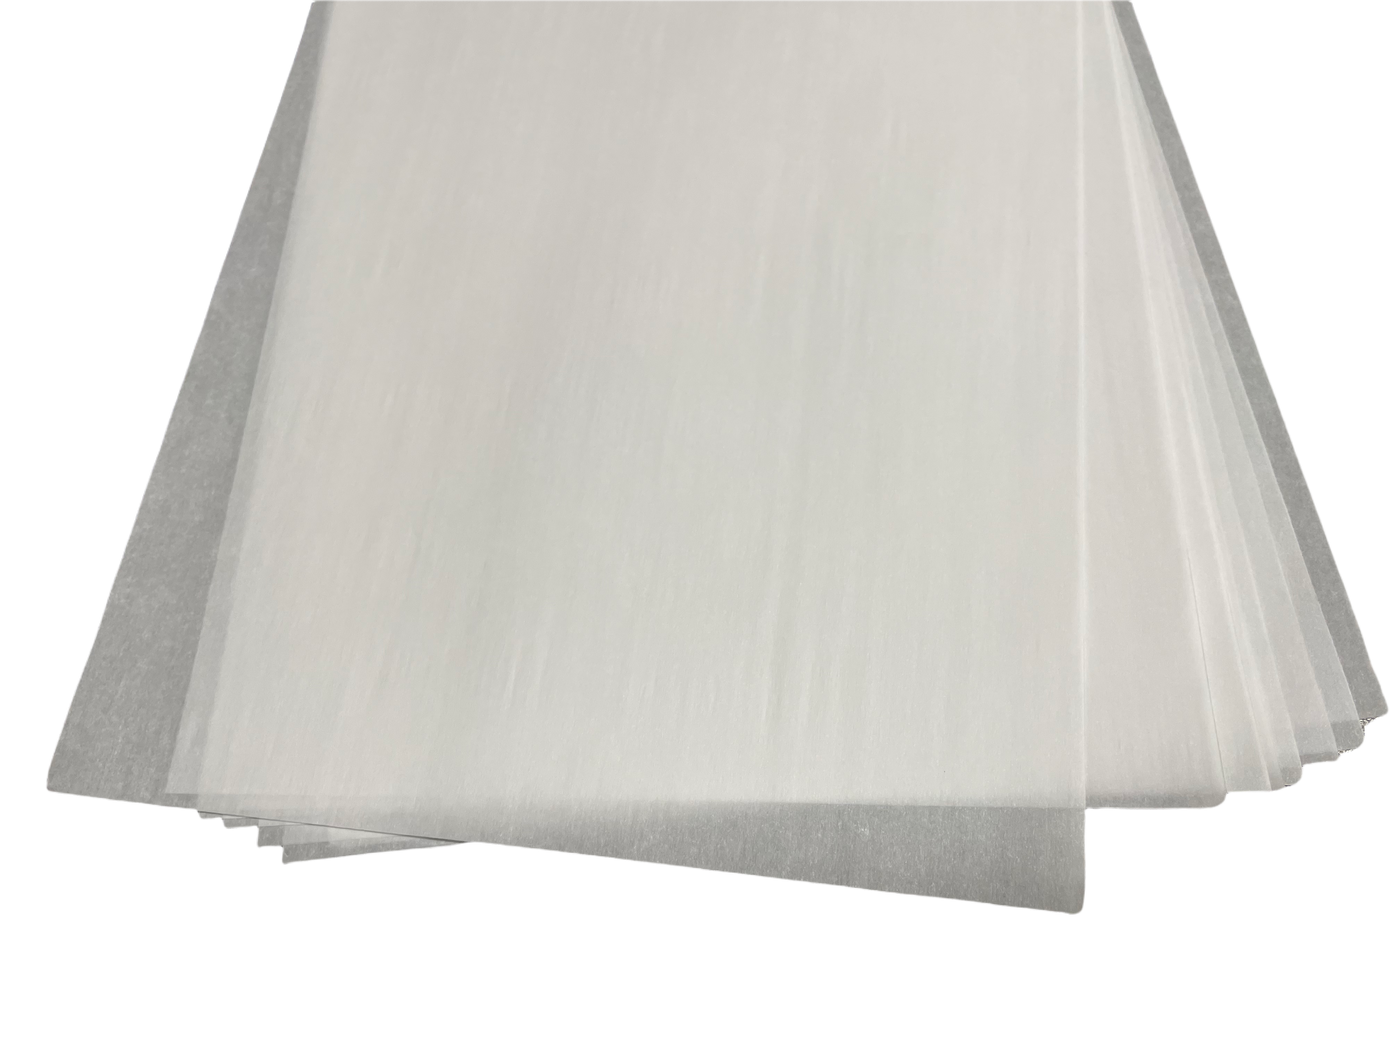 Pastry Tek White Paper Baking Paper Sheet - Precut, Silicone Coated - 4 inch x 4 inch - 1000 Count Box